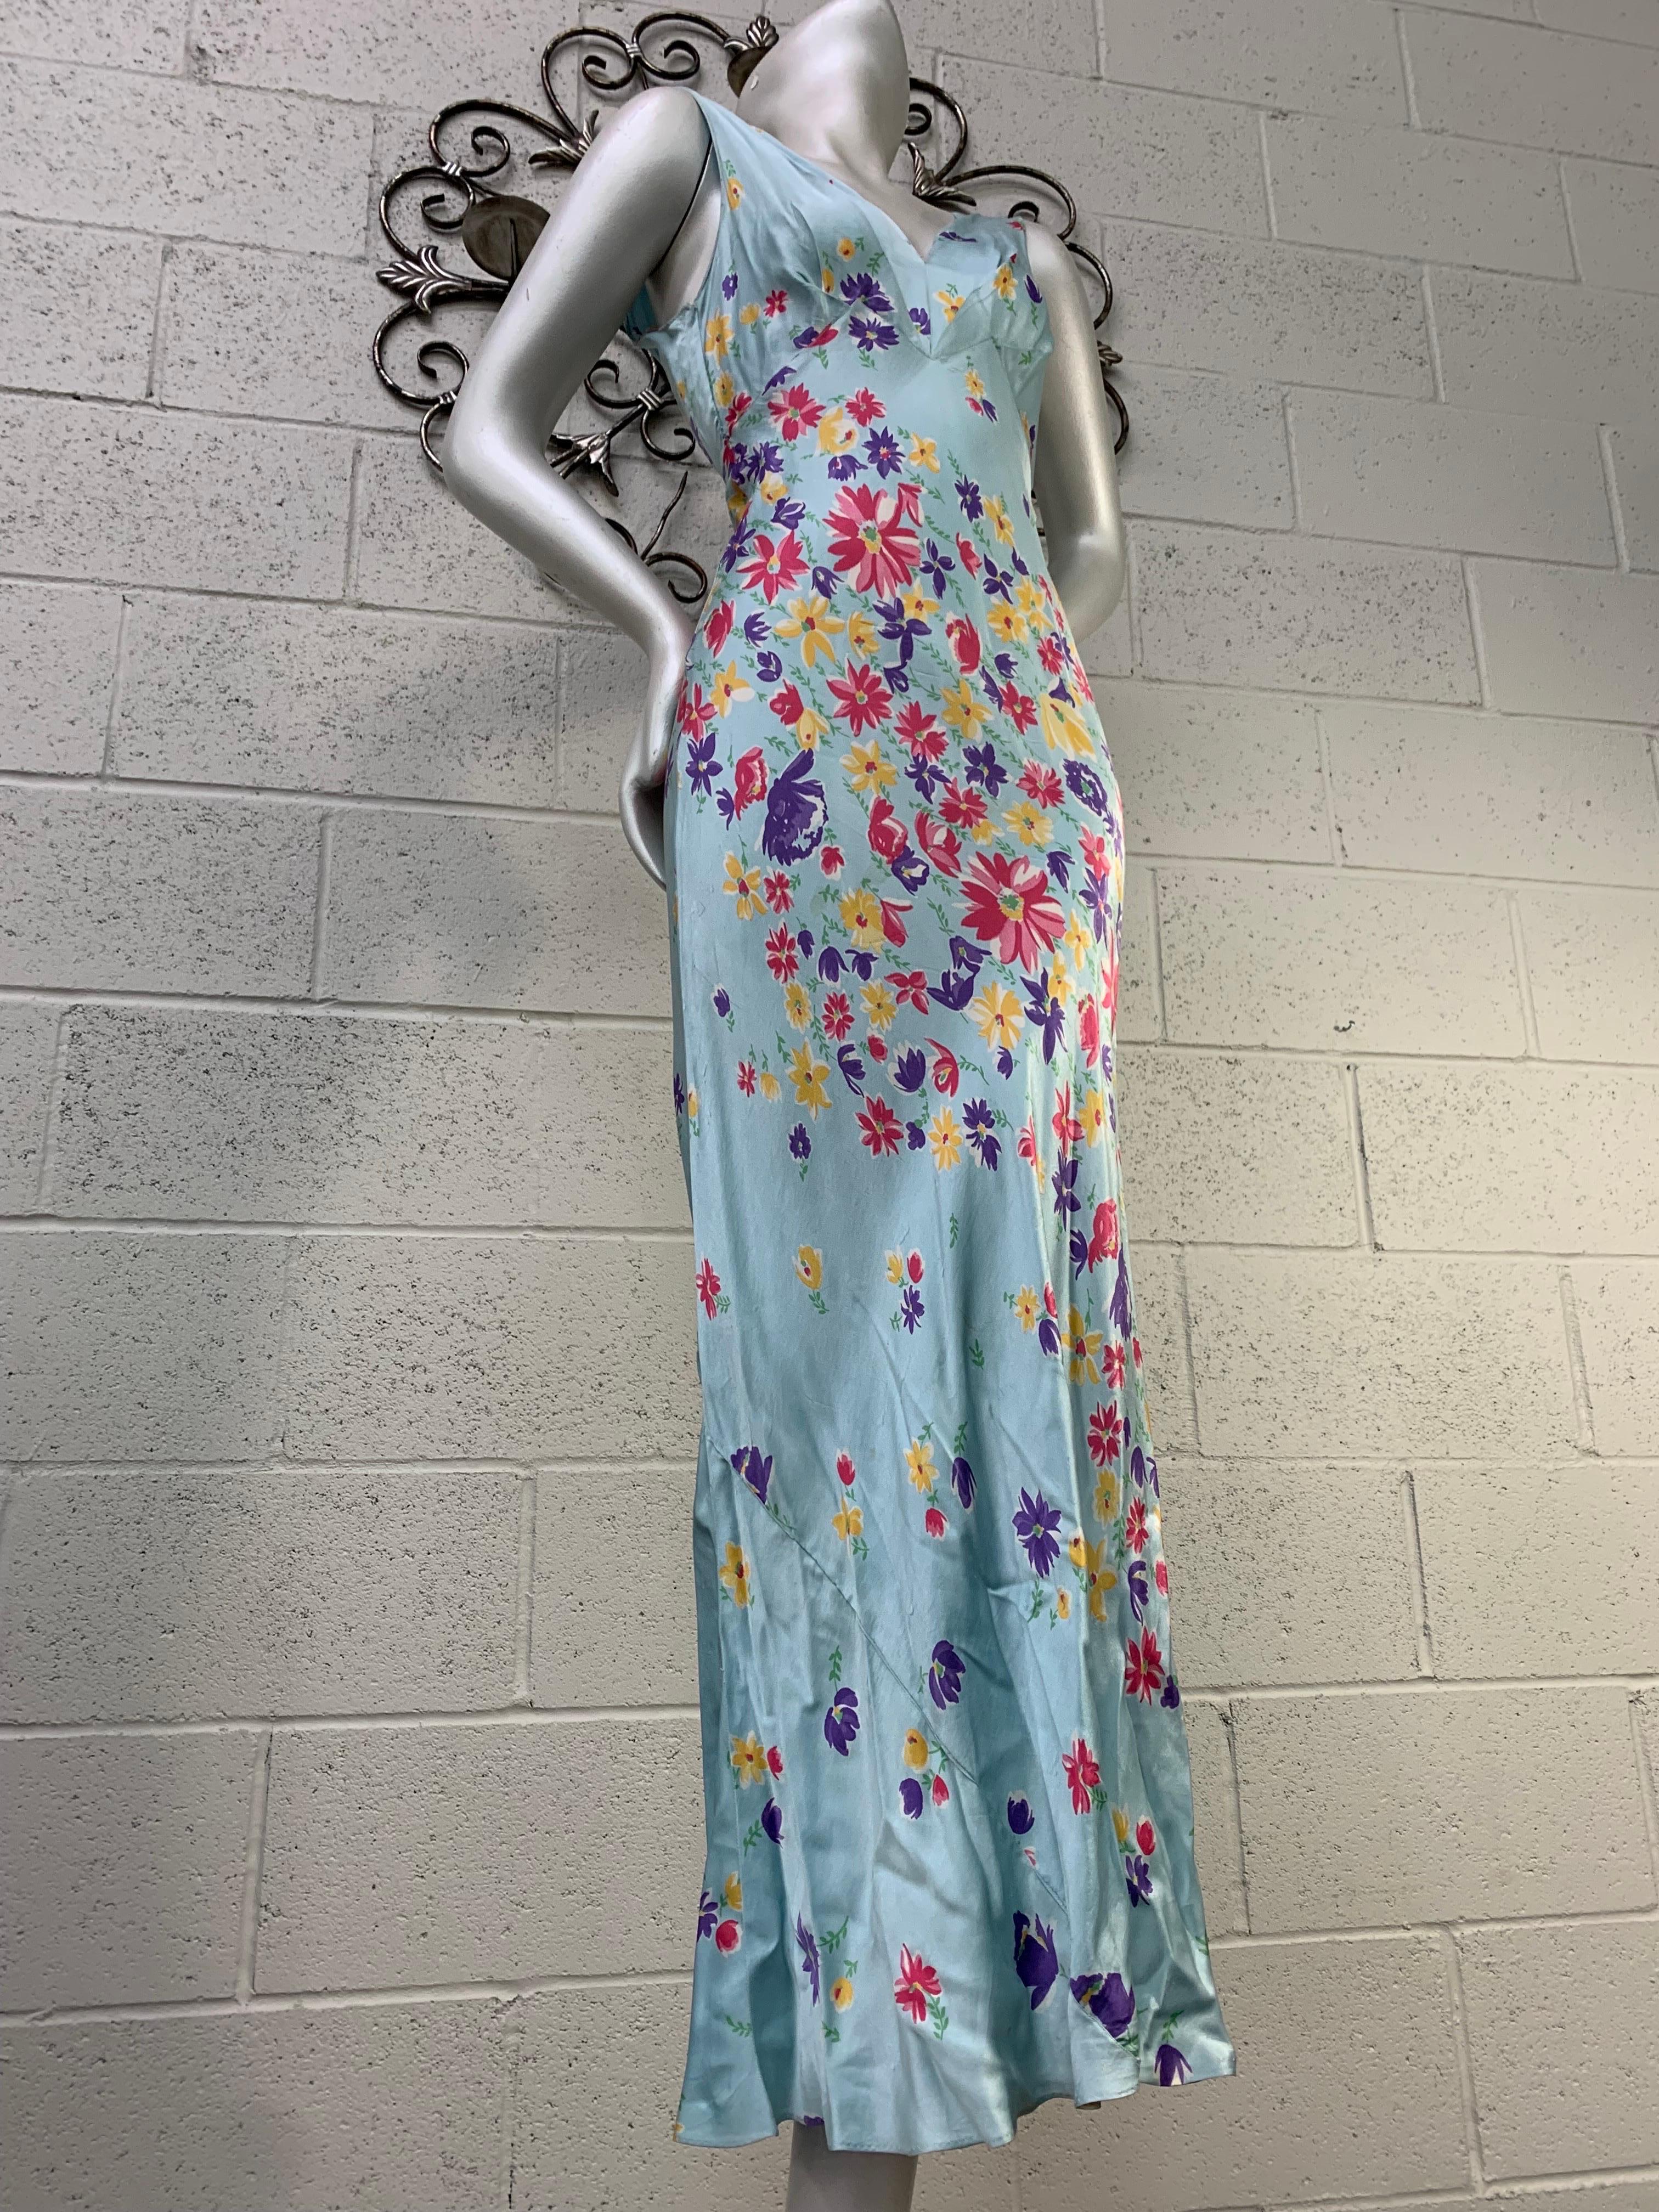 A lovely 1930s slip or negligee of bias-cut silk charmeuse in a classic silhouette: pale blue column wrapped with a multicolor floral descending spiral print. No closure. Size 4-6. A rare beauty. 